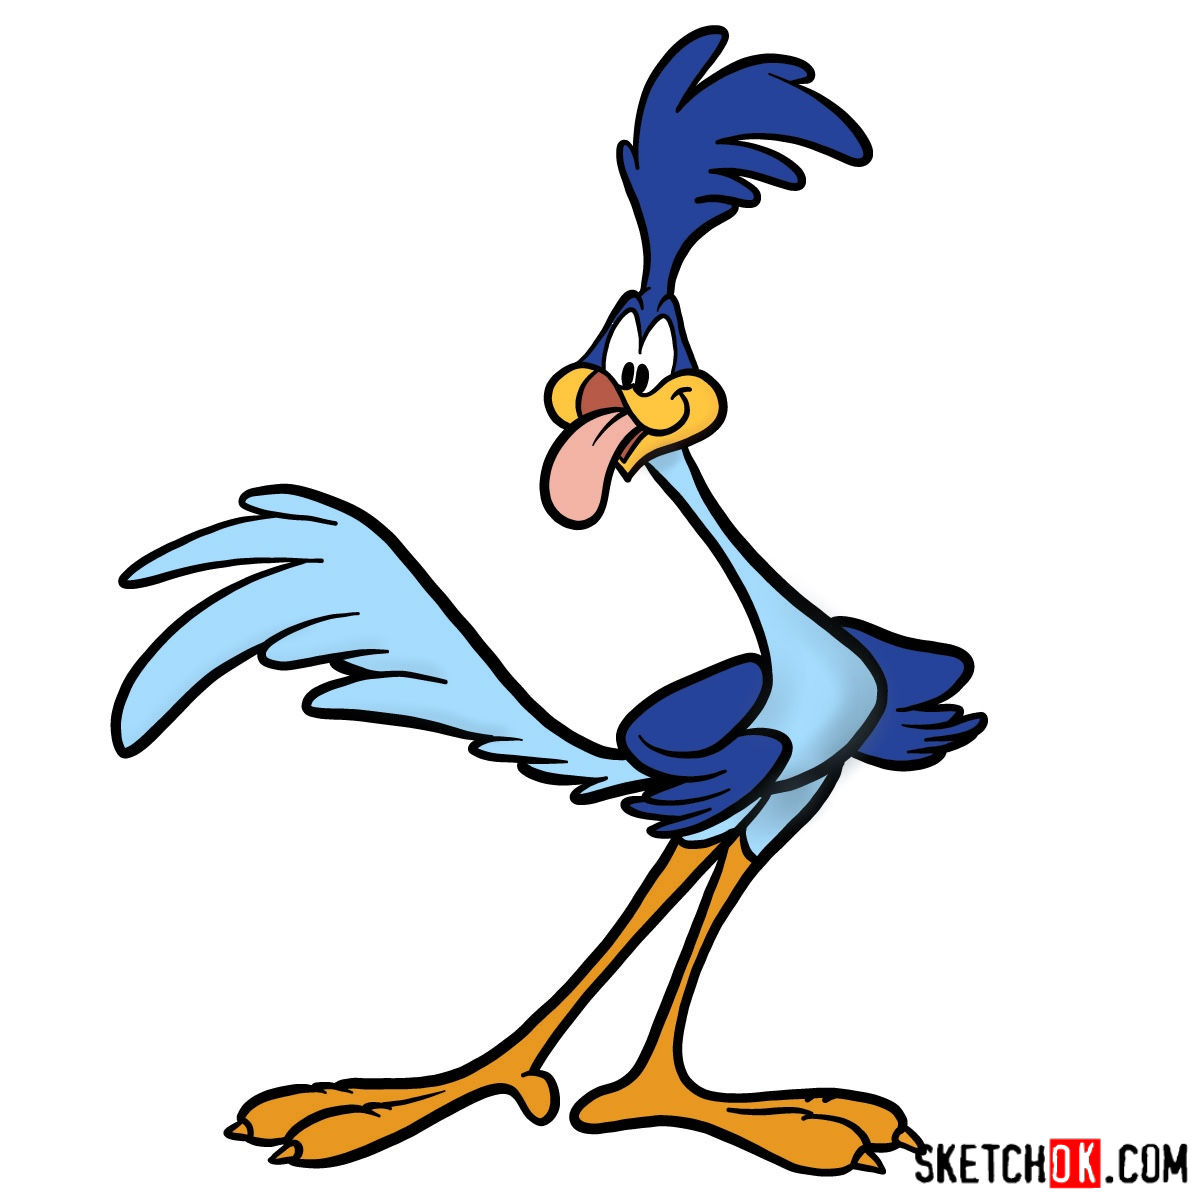 Best How To Draw Road Runner Cartoon Character of the decade Don t miss out 